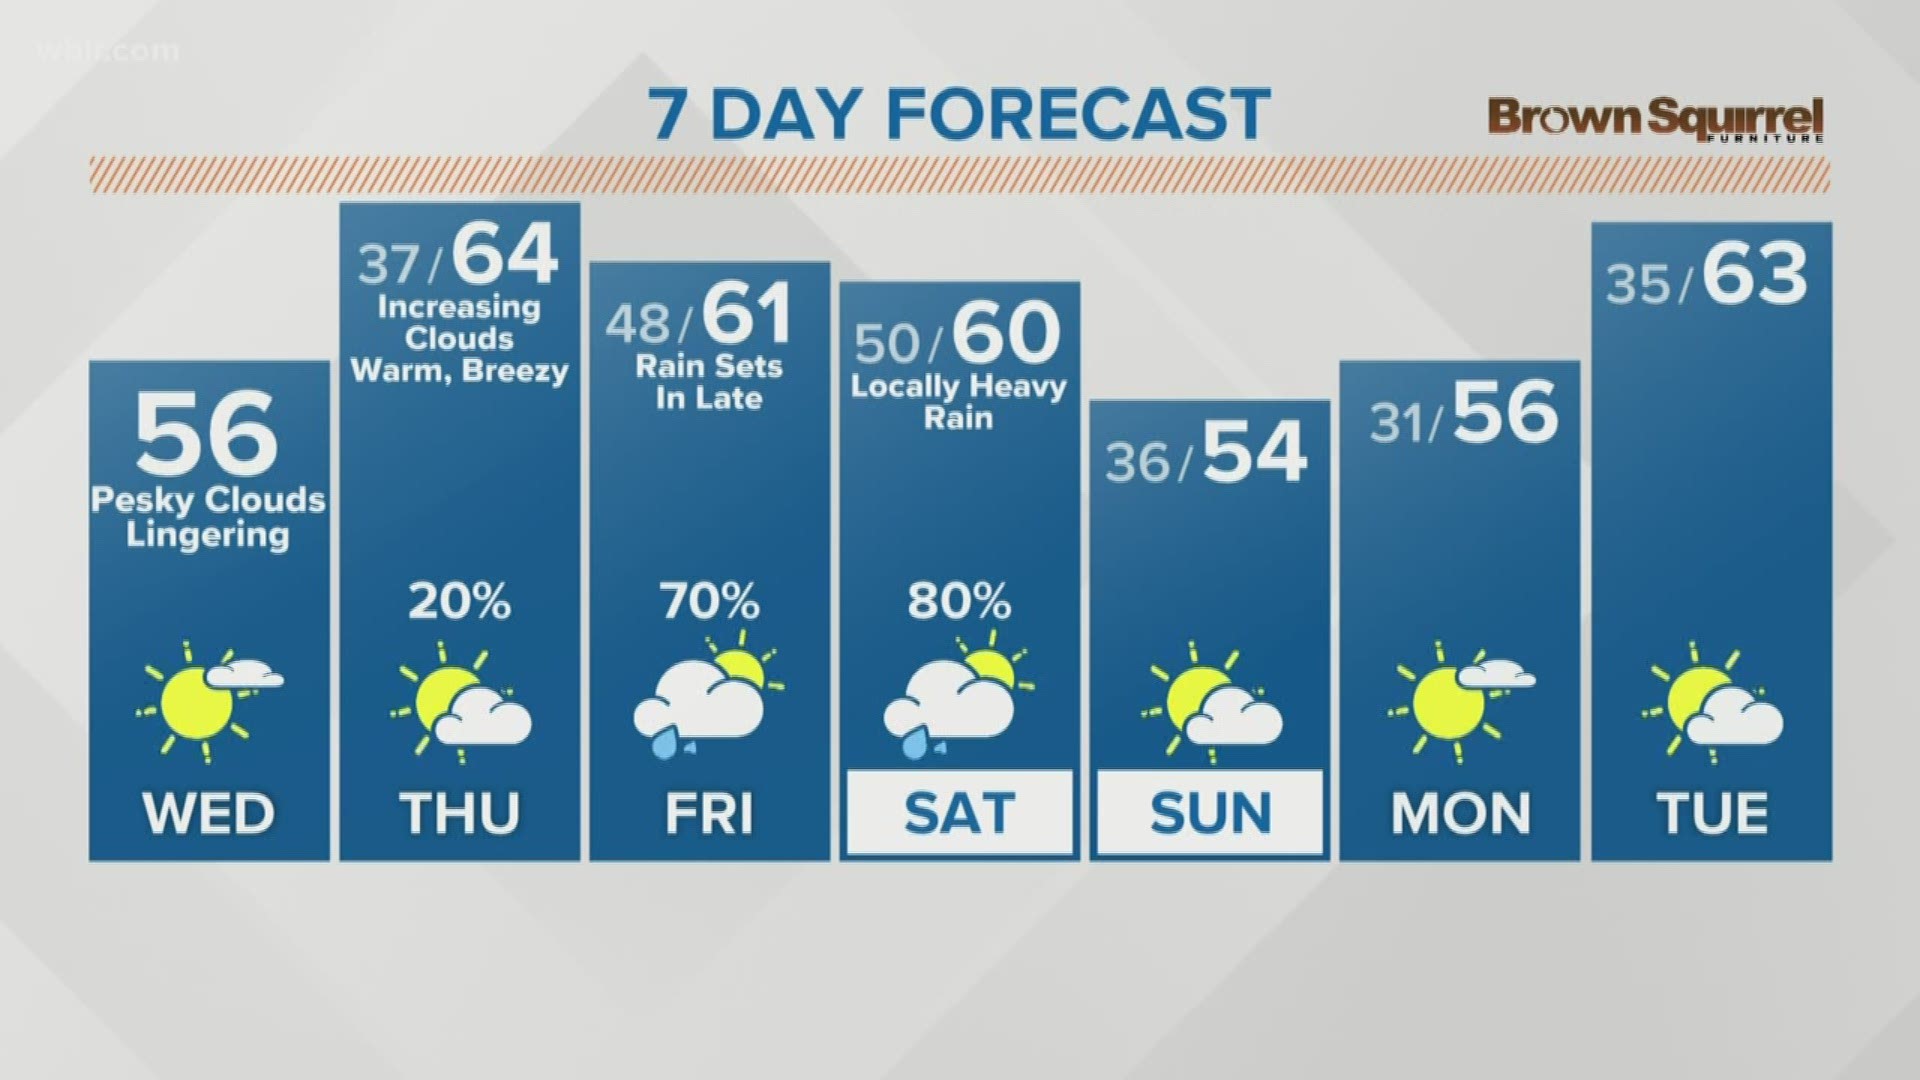 Milder weather returns the next few days before the next system brings showers to end the week